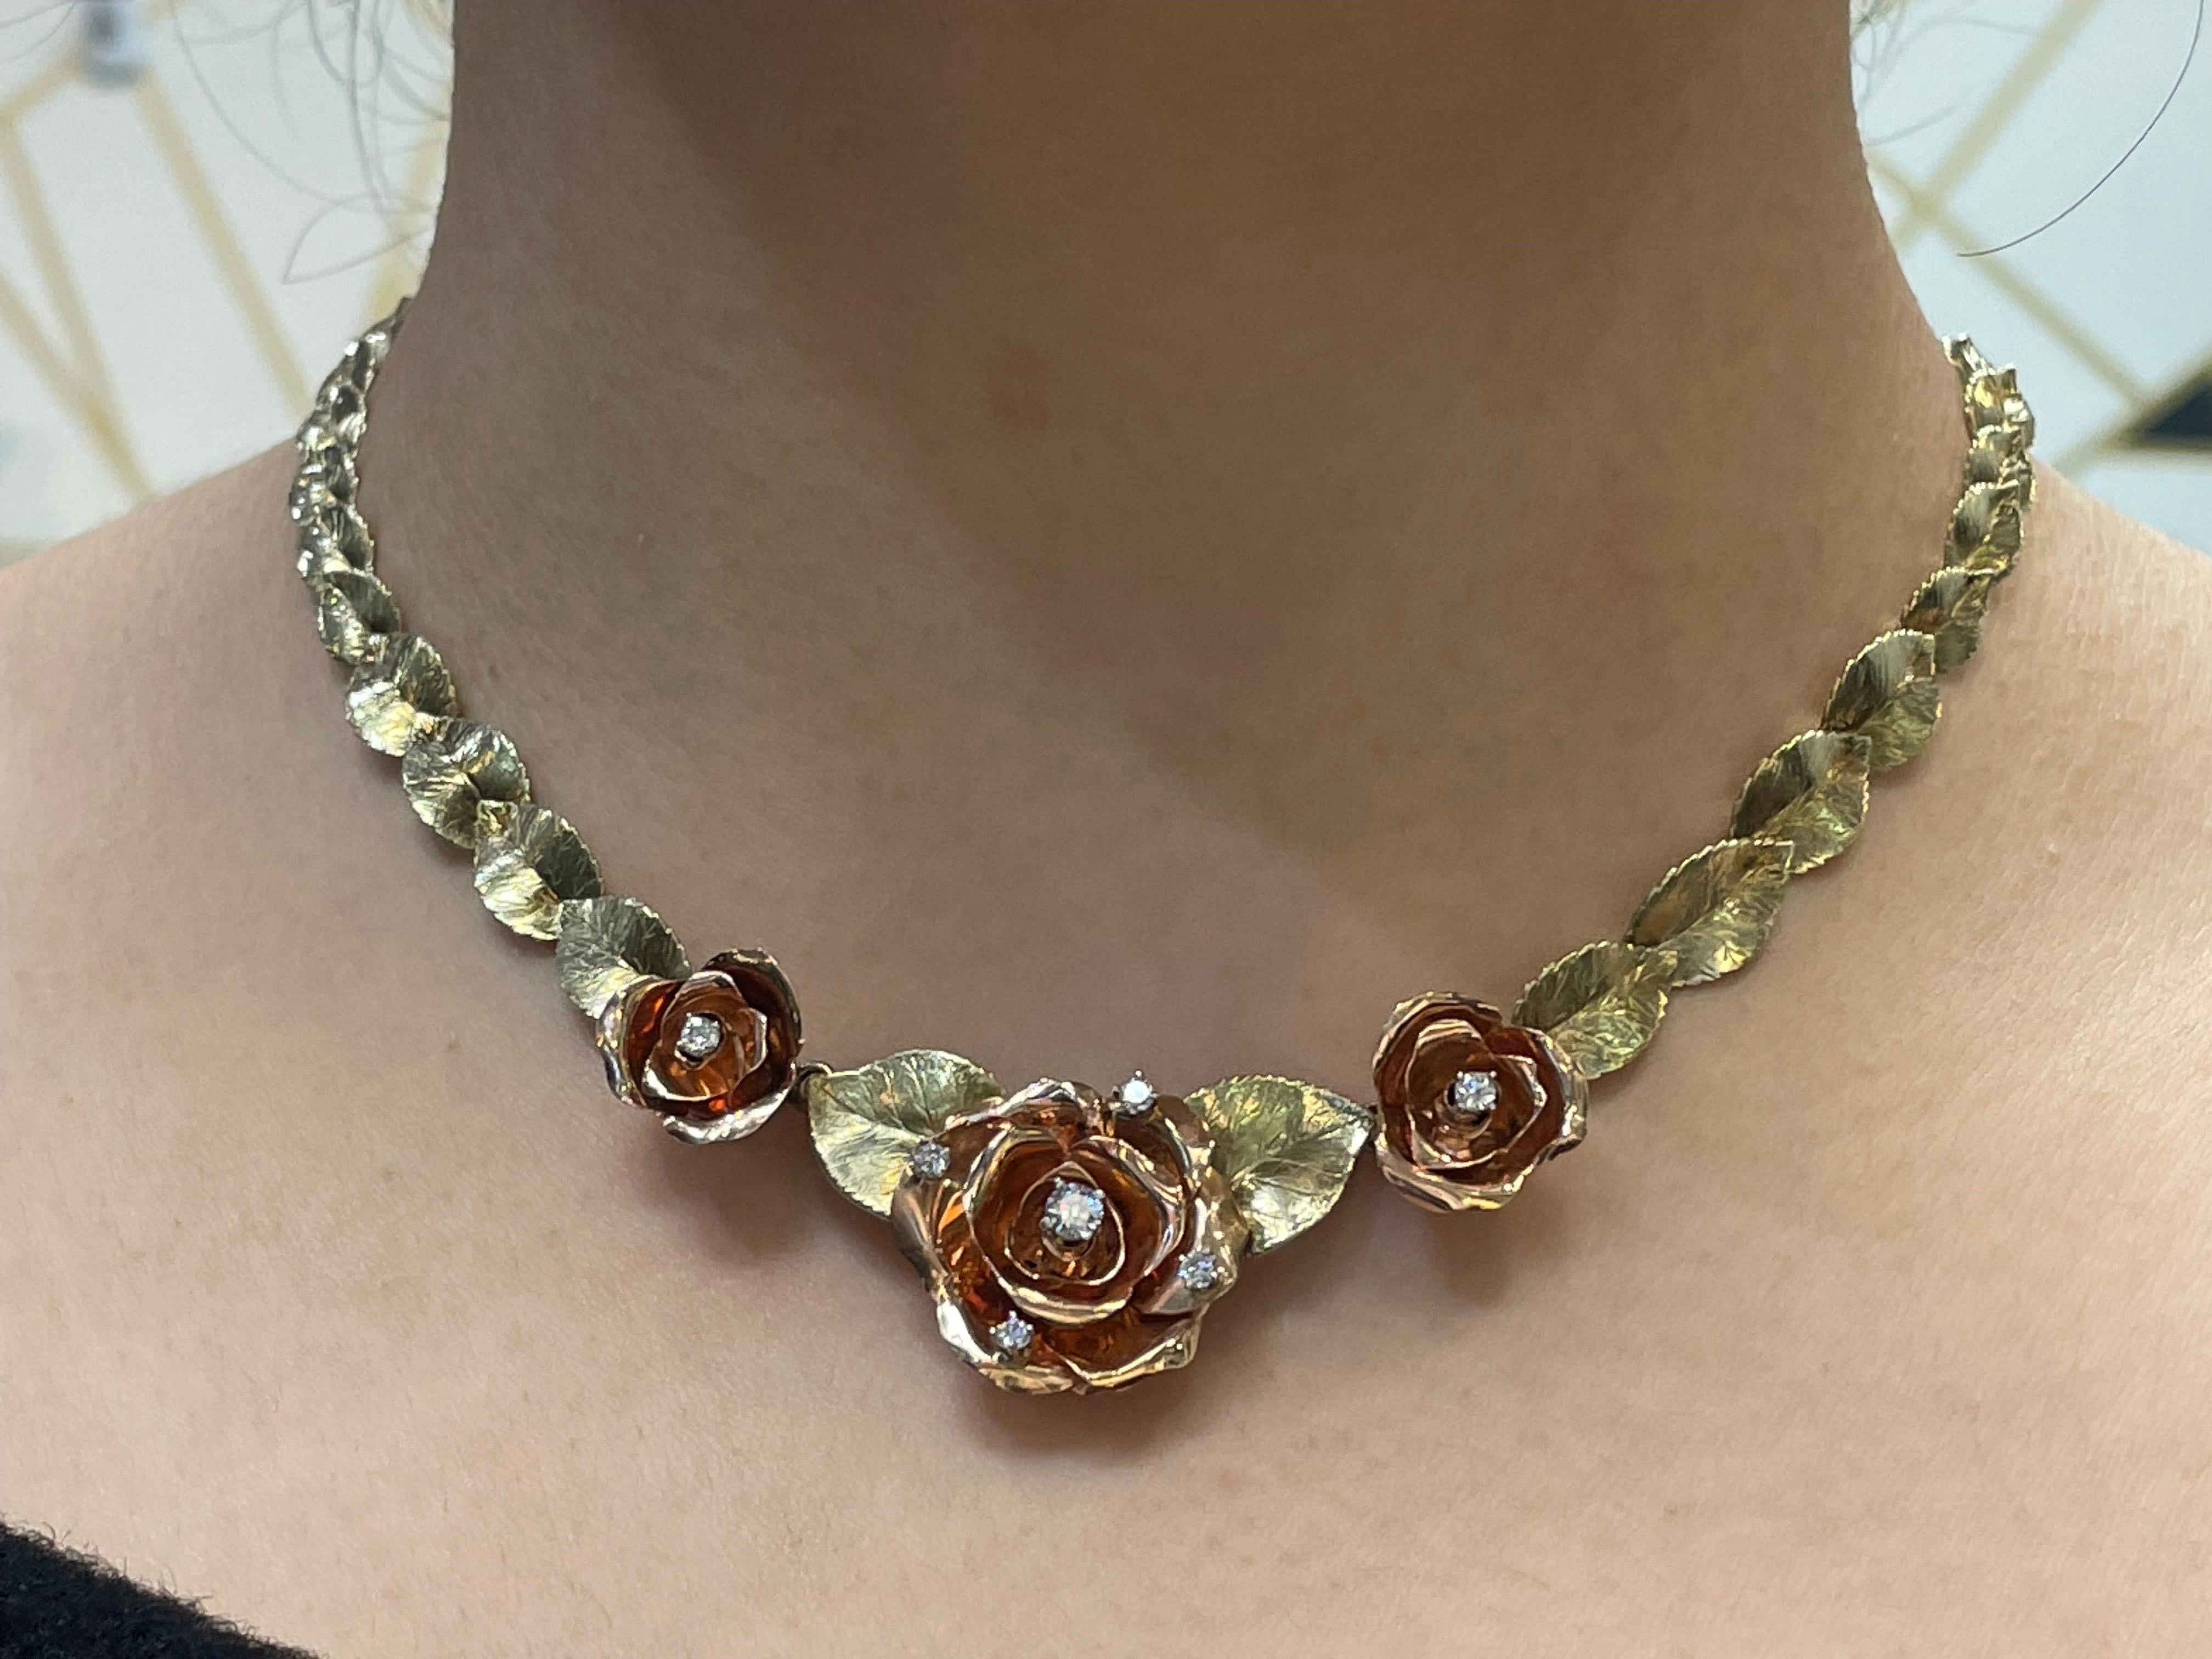 Retro Floral Necklace
 
A two-tone gold floral necklace with three rose gold roses adorned with round-cut diamonds and yellow gold leaves. 

Made circa 1940

Approximate Length: 16